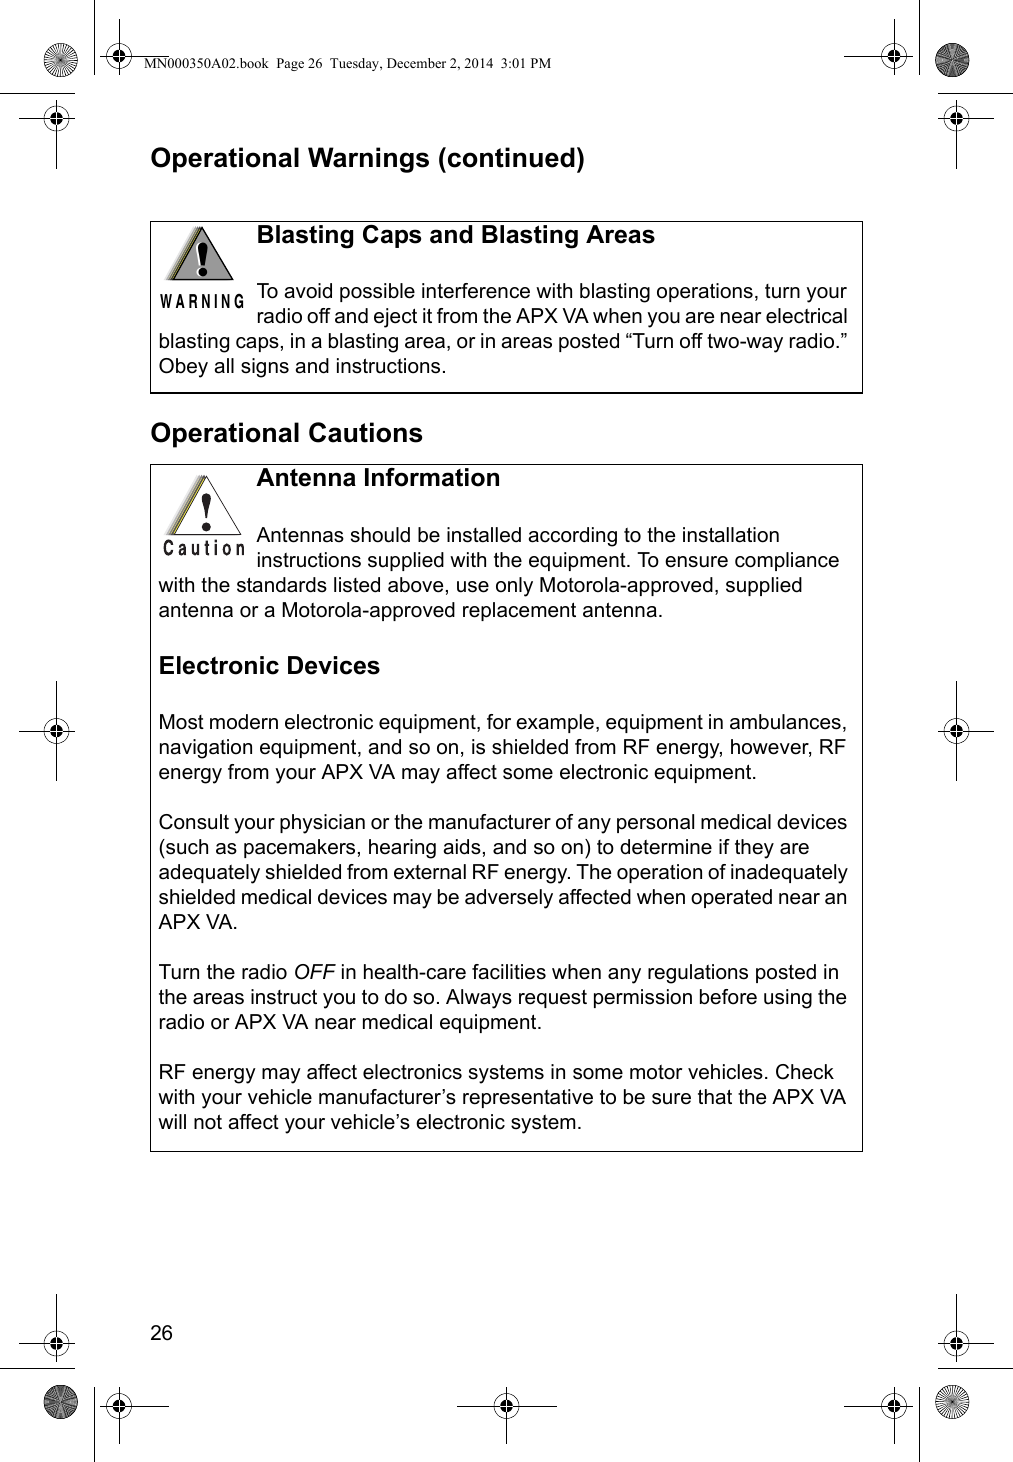 26Operational Warnings (continued)Operational CautionsBlasting Caps and Blasting AreasTo avoid possible interference with blasting operations, turn your radio off and eject it from the APX VA when you are near electrical blasting caps, in a blasting area, or in areas posted “Turn off two-way radio.” Obey all signs and instructions.!W A R N I N G!Antenna InformationAntennas should be installed according to the installation instructions supplied with the equipment. To ensure compliance with the standards listed above, use only Motorola-approved, supplied antenna or a Motorola-approved replacement antenna.Electronic DevicesMost modern electronic equipment, for example, equipment in ambulances, navigation equipment, and so on, is shielded from RF energy, however, RF energy from your APX VA may affect some electronic equipment.Consult your physician or the manufacturer of any personal medical devices (such as pacemakers, hearing aids, and so on) to determine if they are adequately shielded from external RF energy. The operation of inadequately shielded medical devices may be adversely affected when operated near an APX VA.Turn the radio OFF in health-care facilities when any regulations posted in the areas instruct you to do so. Always request permission before using the radio or APX VA near medical equipment.RF energy may affect electronics systems in some motor vehicles. Check with your vehicle manufacturer’s representative to be sure that the APX VA will not affect your vehicle’s electronic system.MN000350A02.book  Page 26  Tuesday, December 2, 2014  3:01 PM